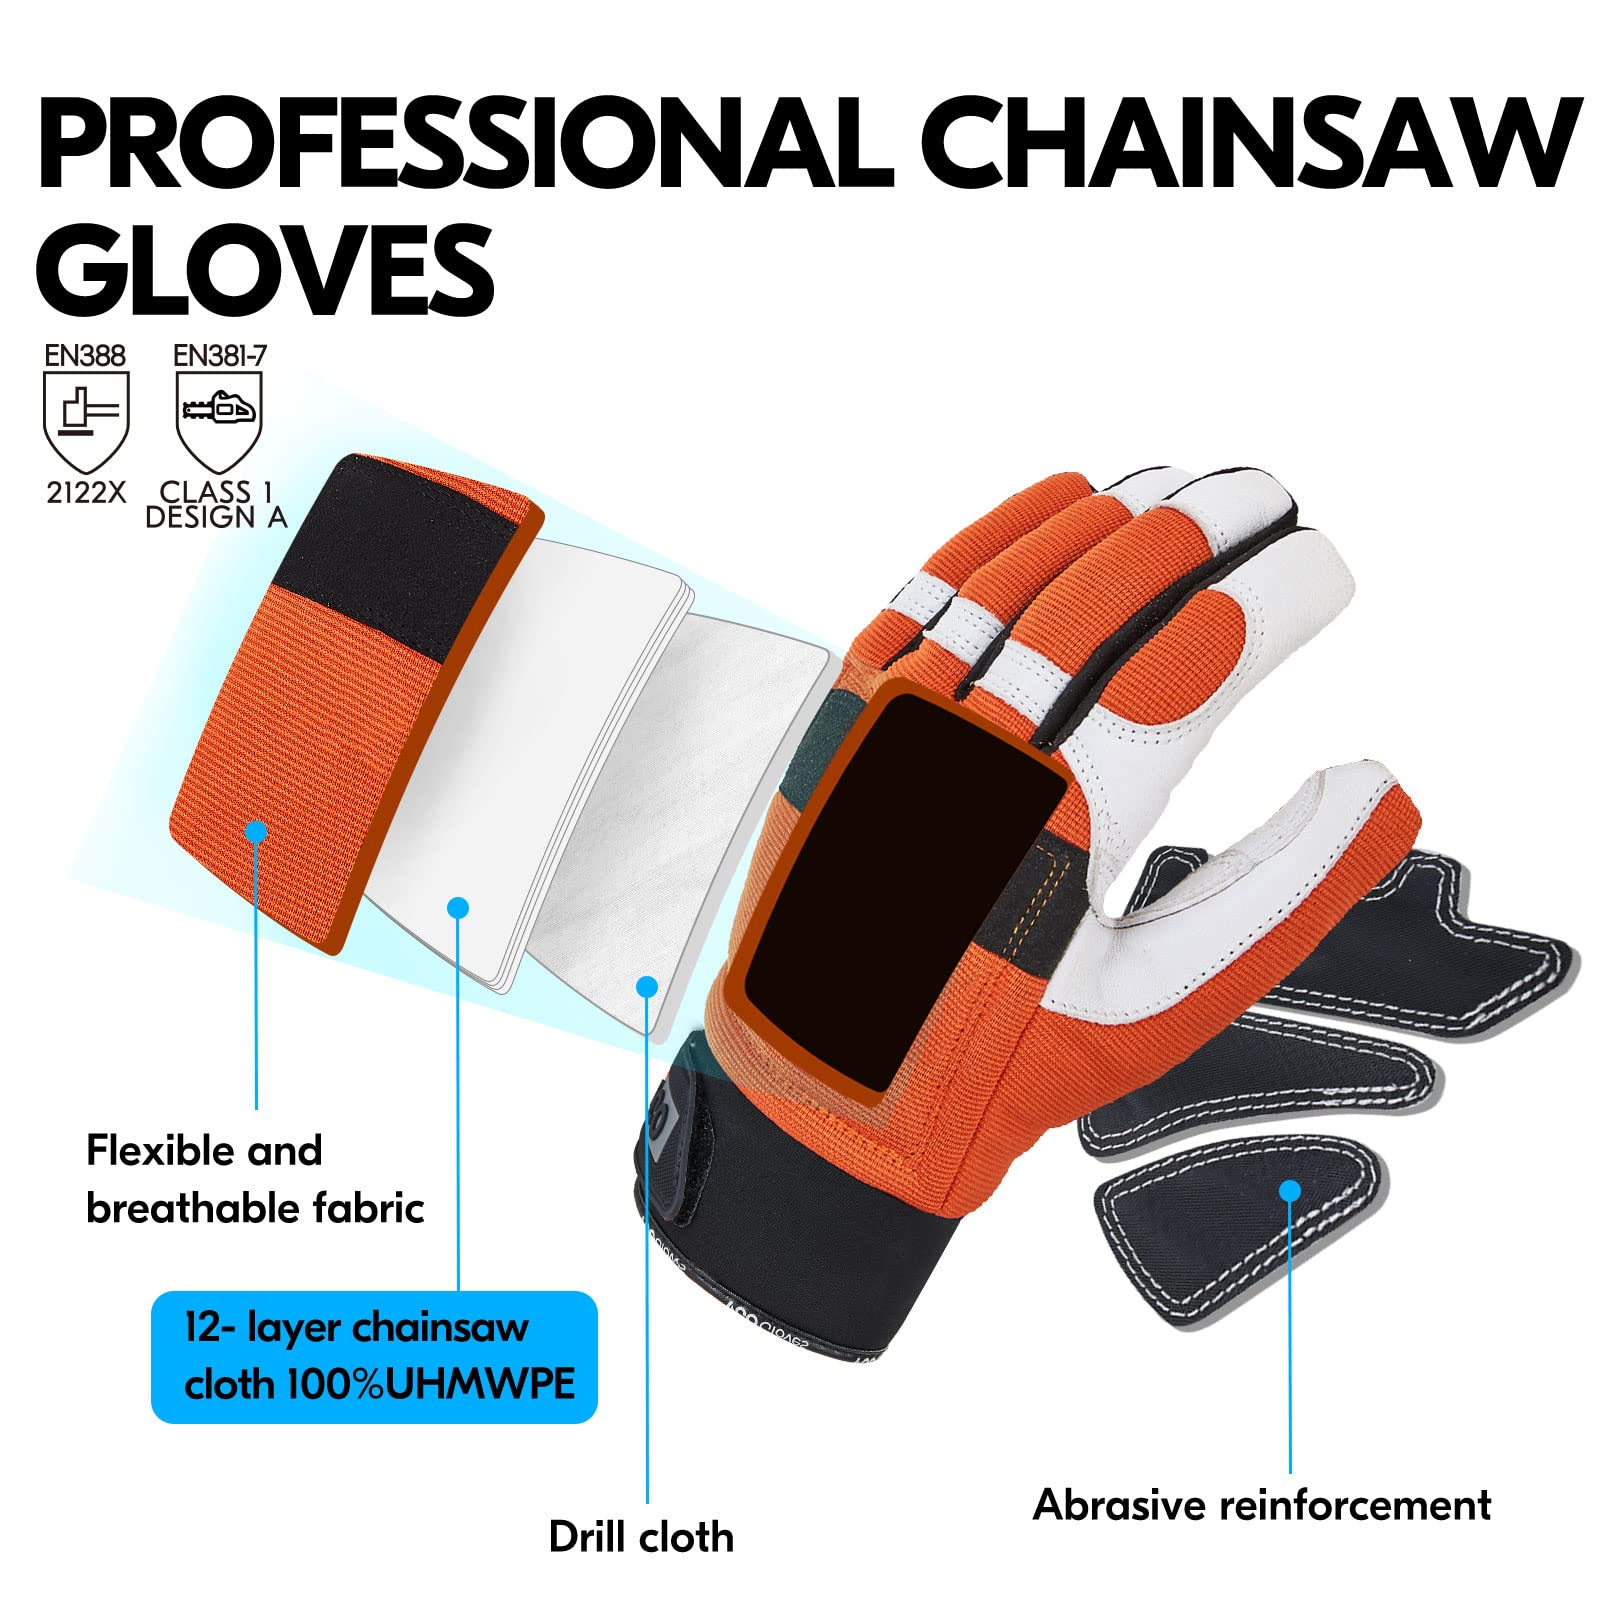 Vgo... 1-Pair Chainsaw Work Gloves Saw Protection on Left Hand Back (Size L, Orange, GA8912)